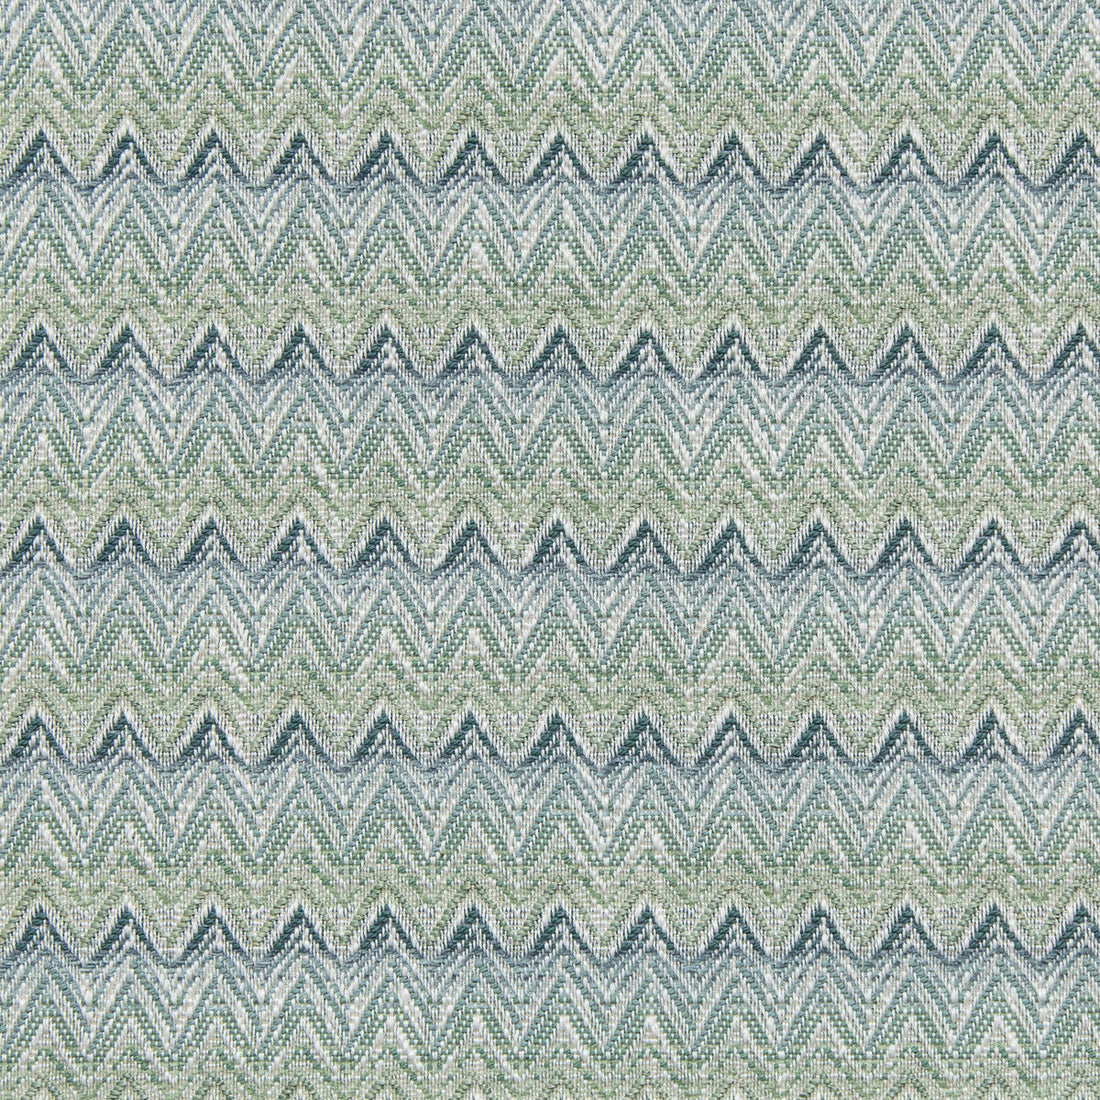 Cambrose Weave fabric in mineral color - pattern 2020107.13.0 - by Lee Jofa in the Linford Weaves collection